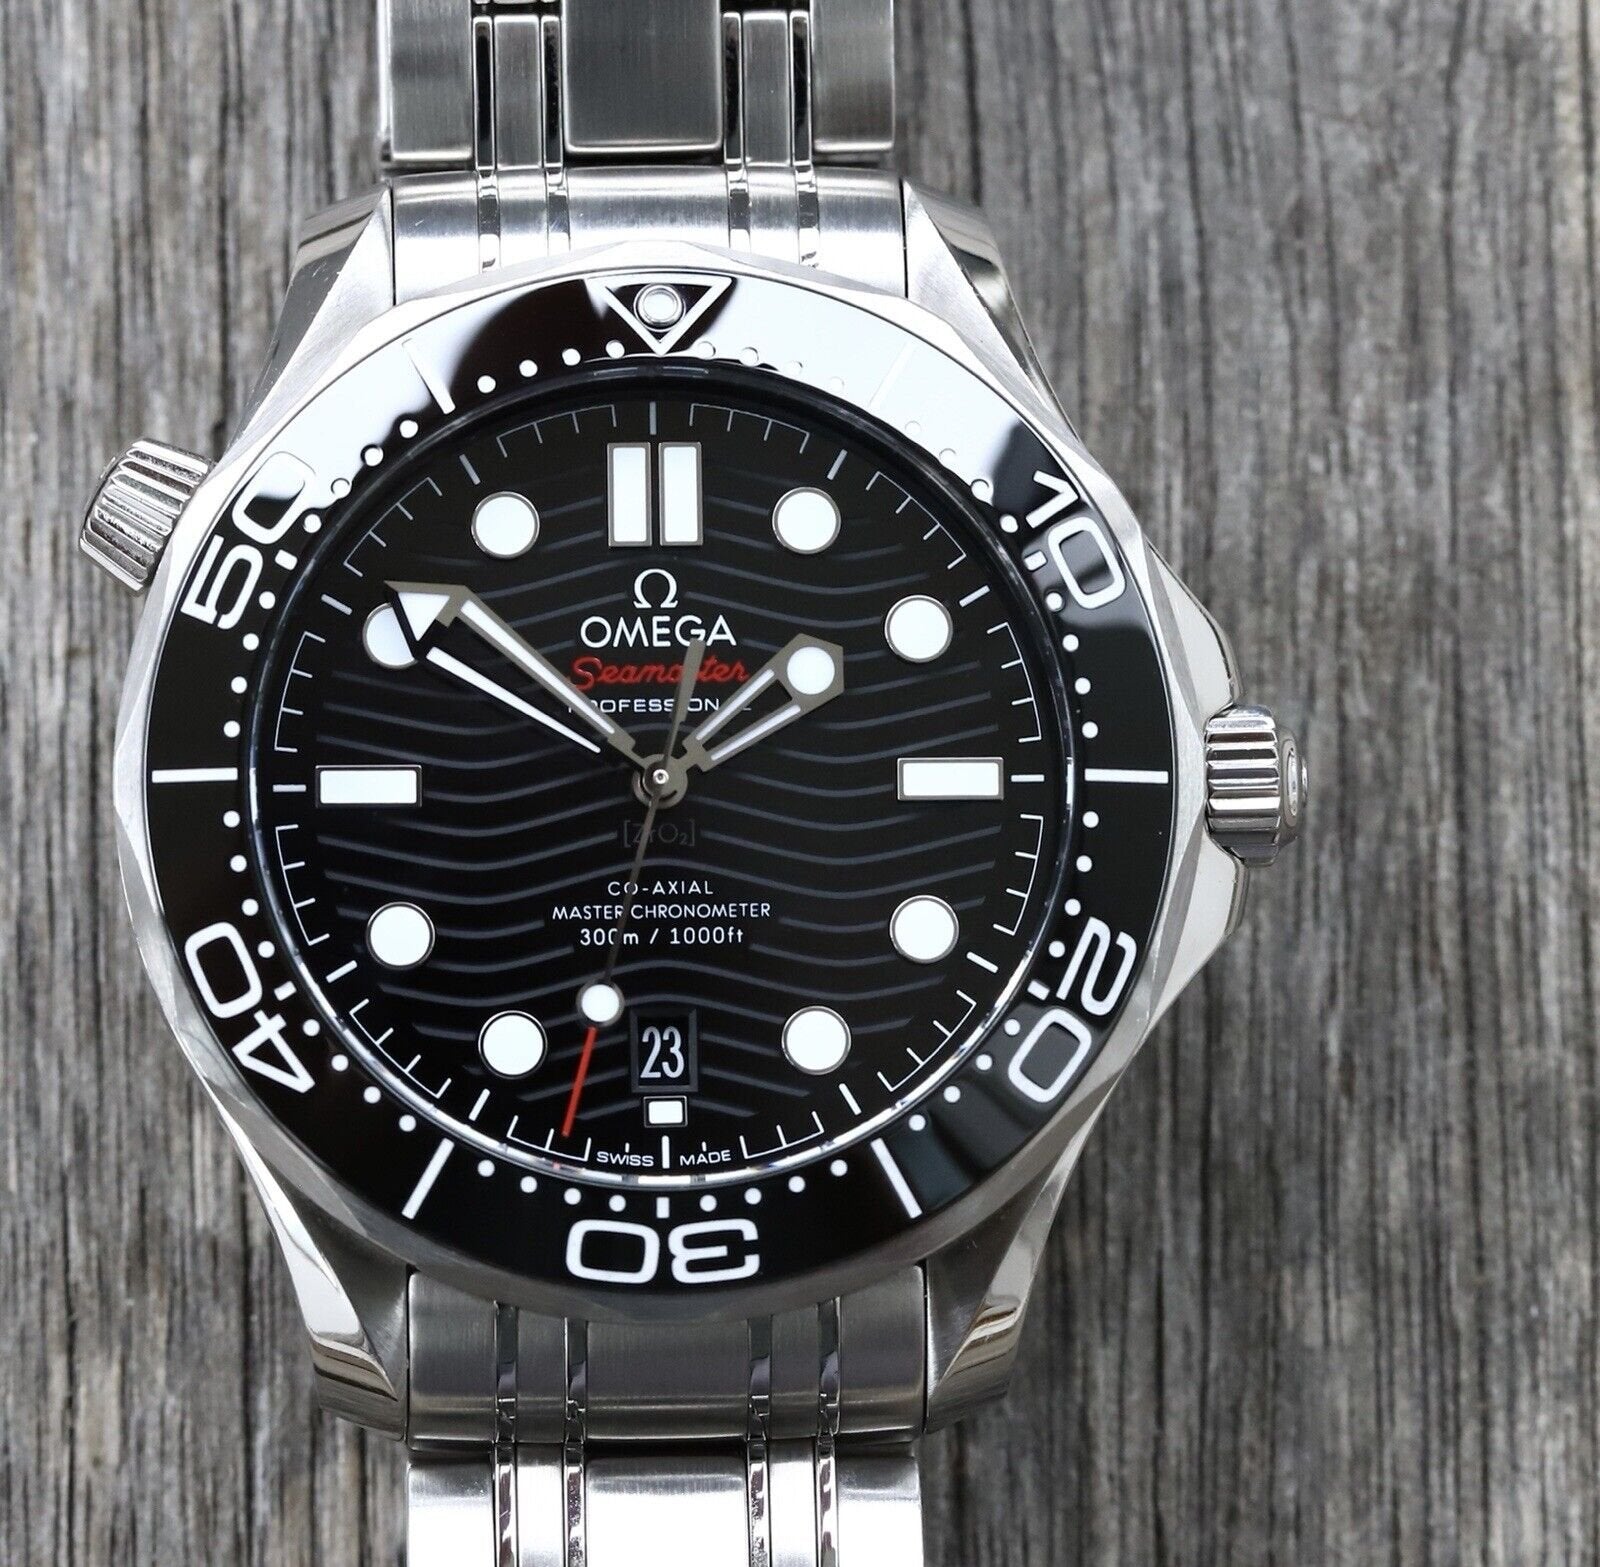 Omega_Seamaster_Diver_300M_Co-Axial_Black_42mm_210.30.42.20.01.001_-_2020_Watch_Vault_01.jpg